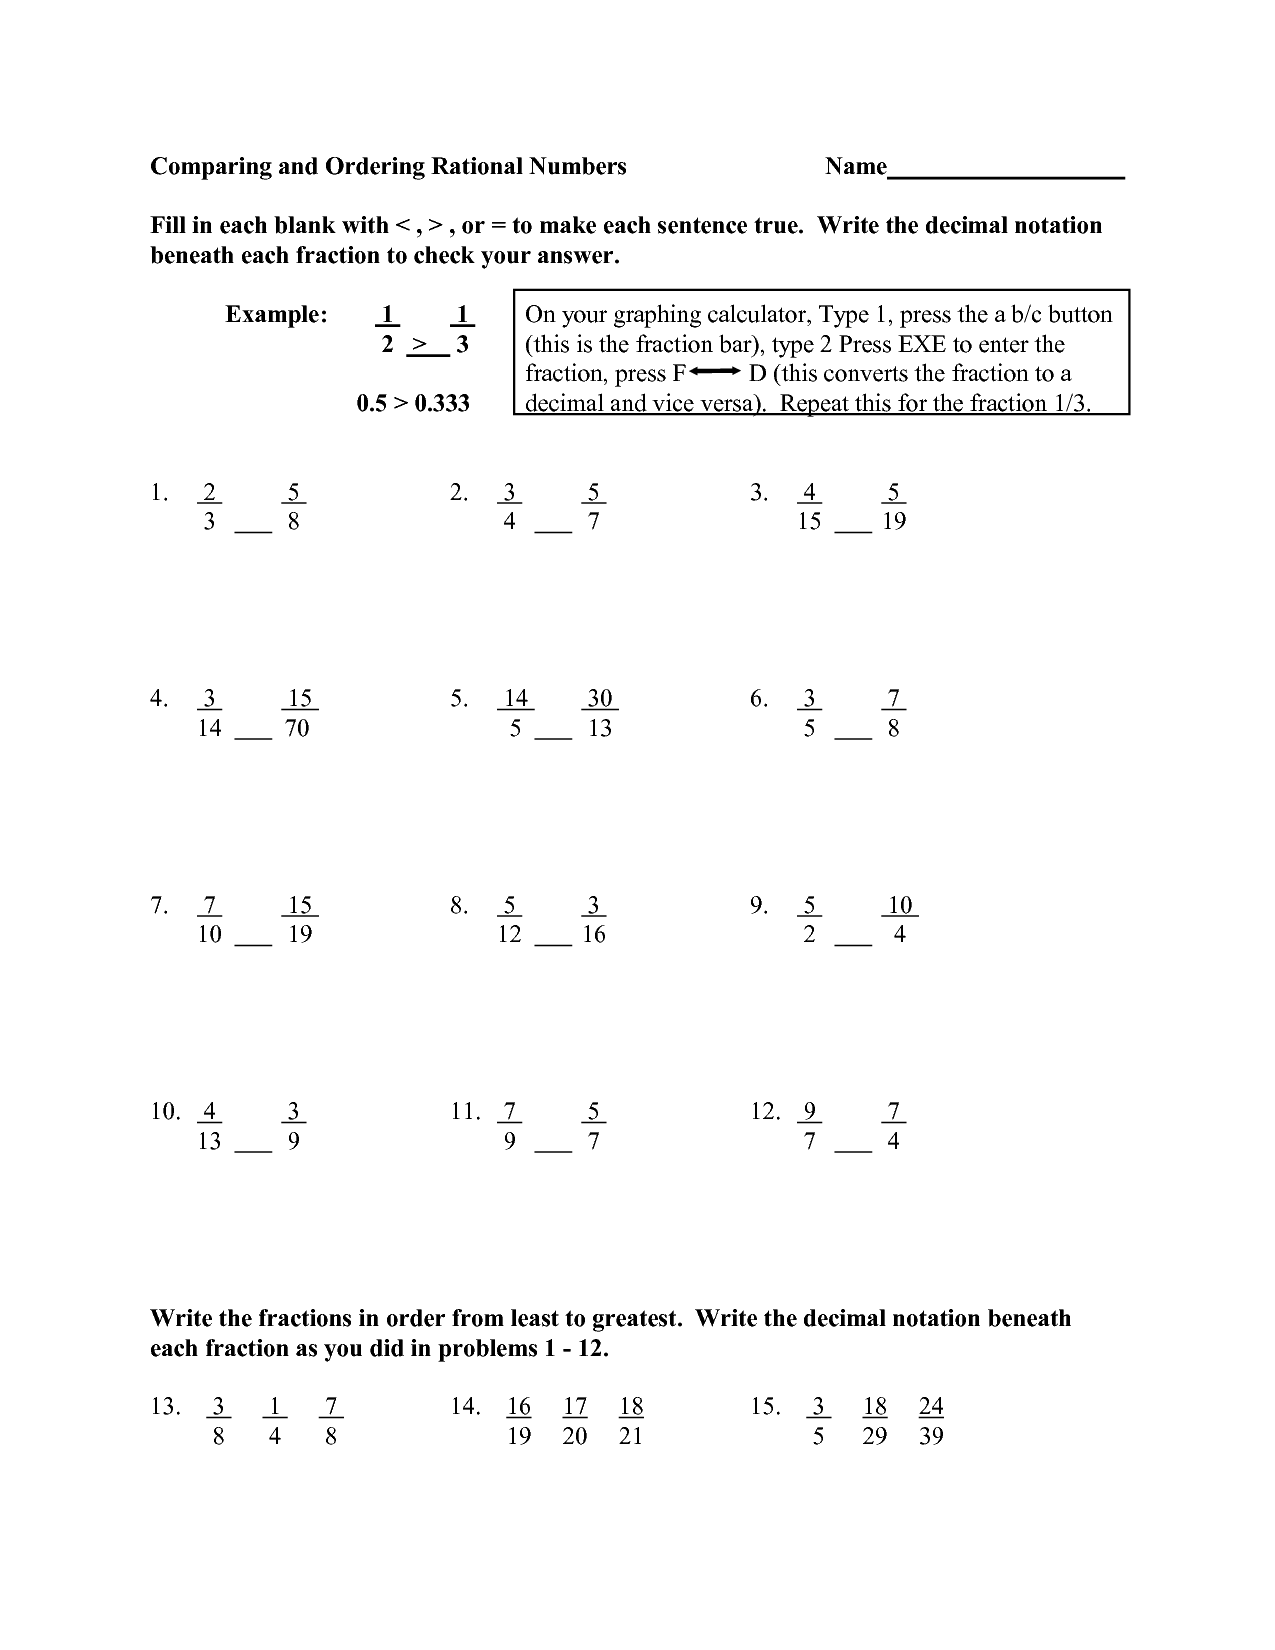 Worksheet On Rational Numbers For Class 8 Pdf